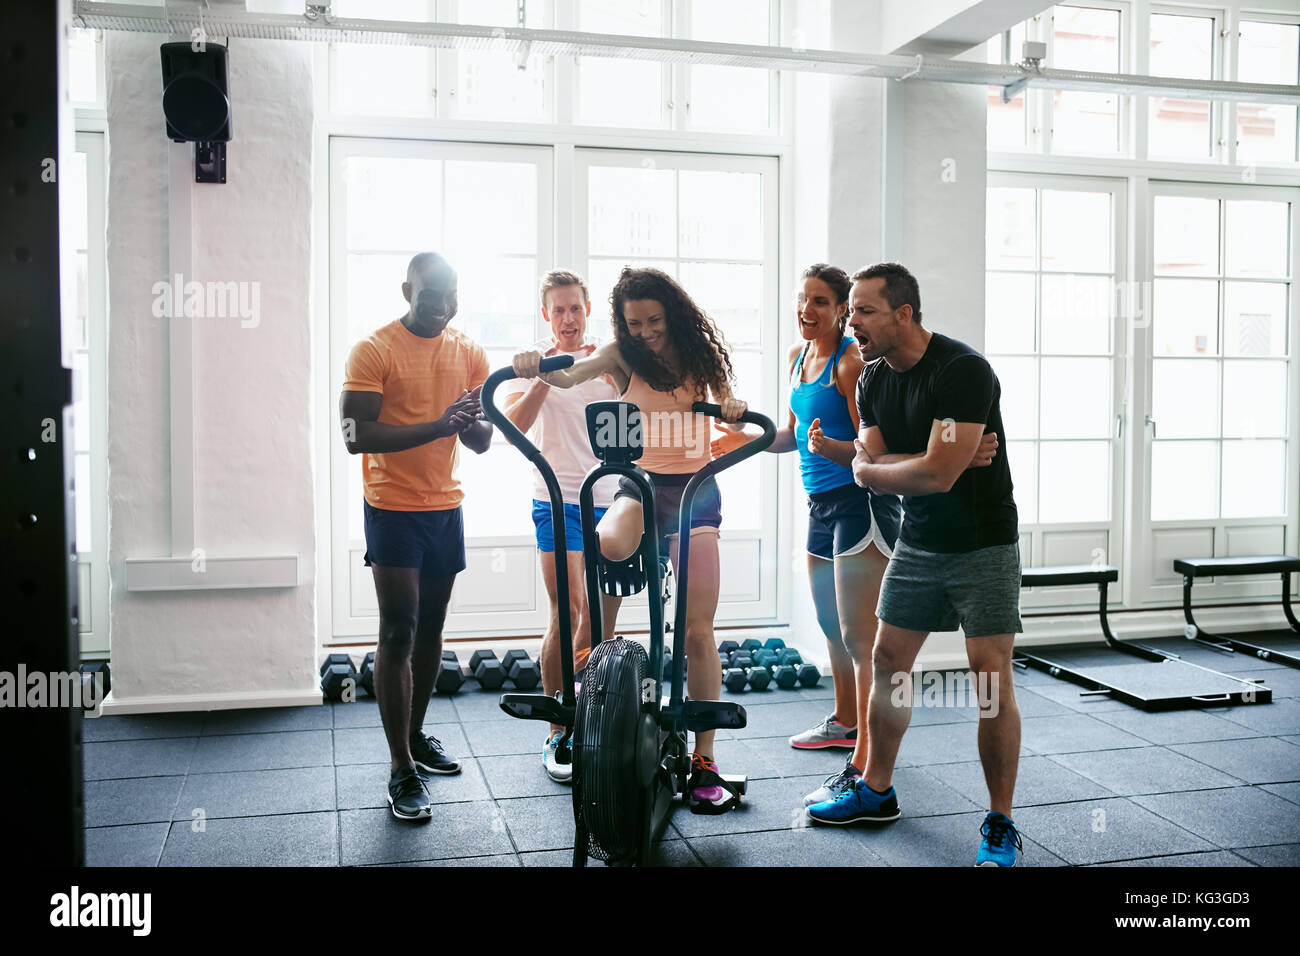 Group of smiling people cheering on their friend riding a stationary bike while working out together in a gym Stock Photo